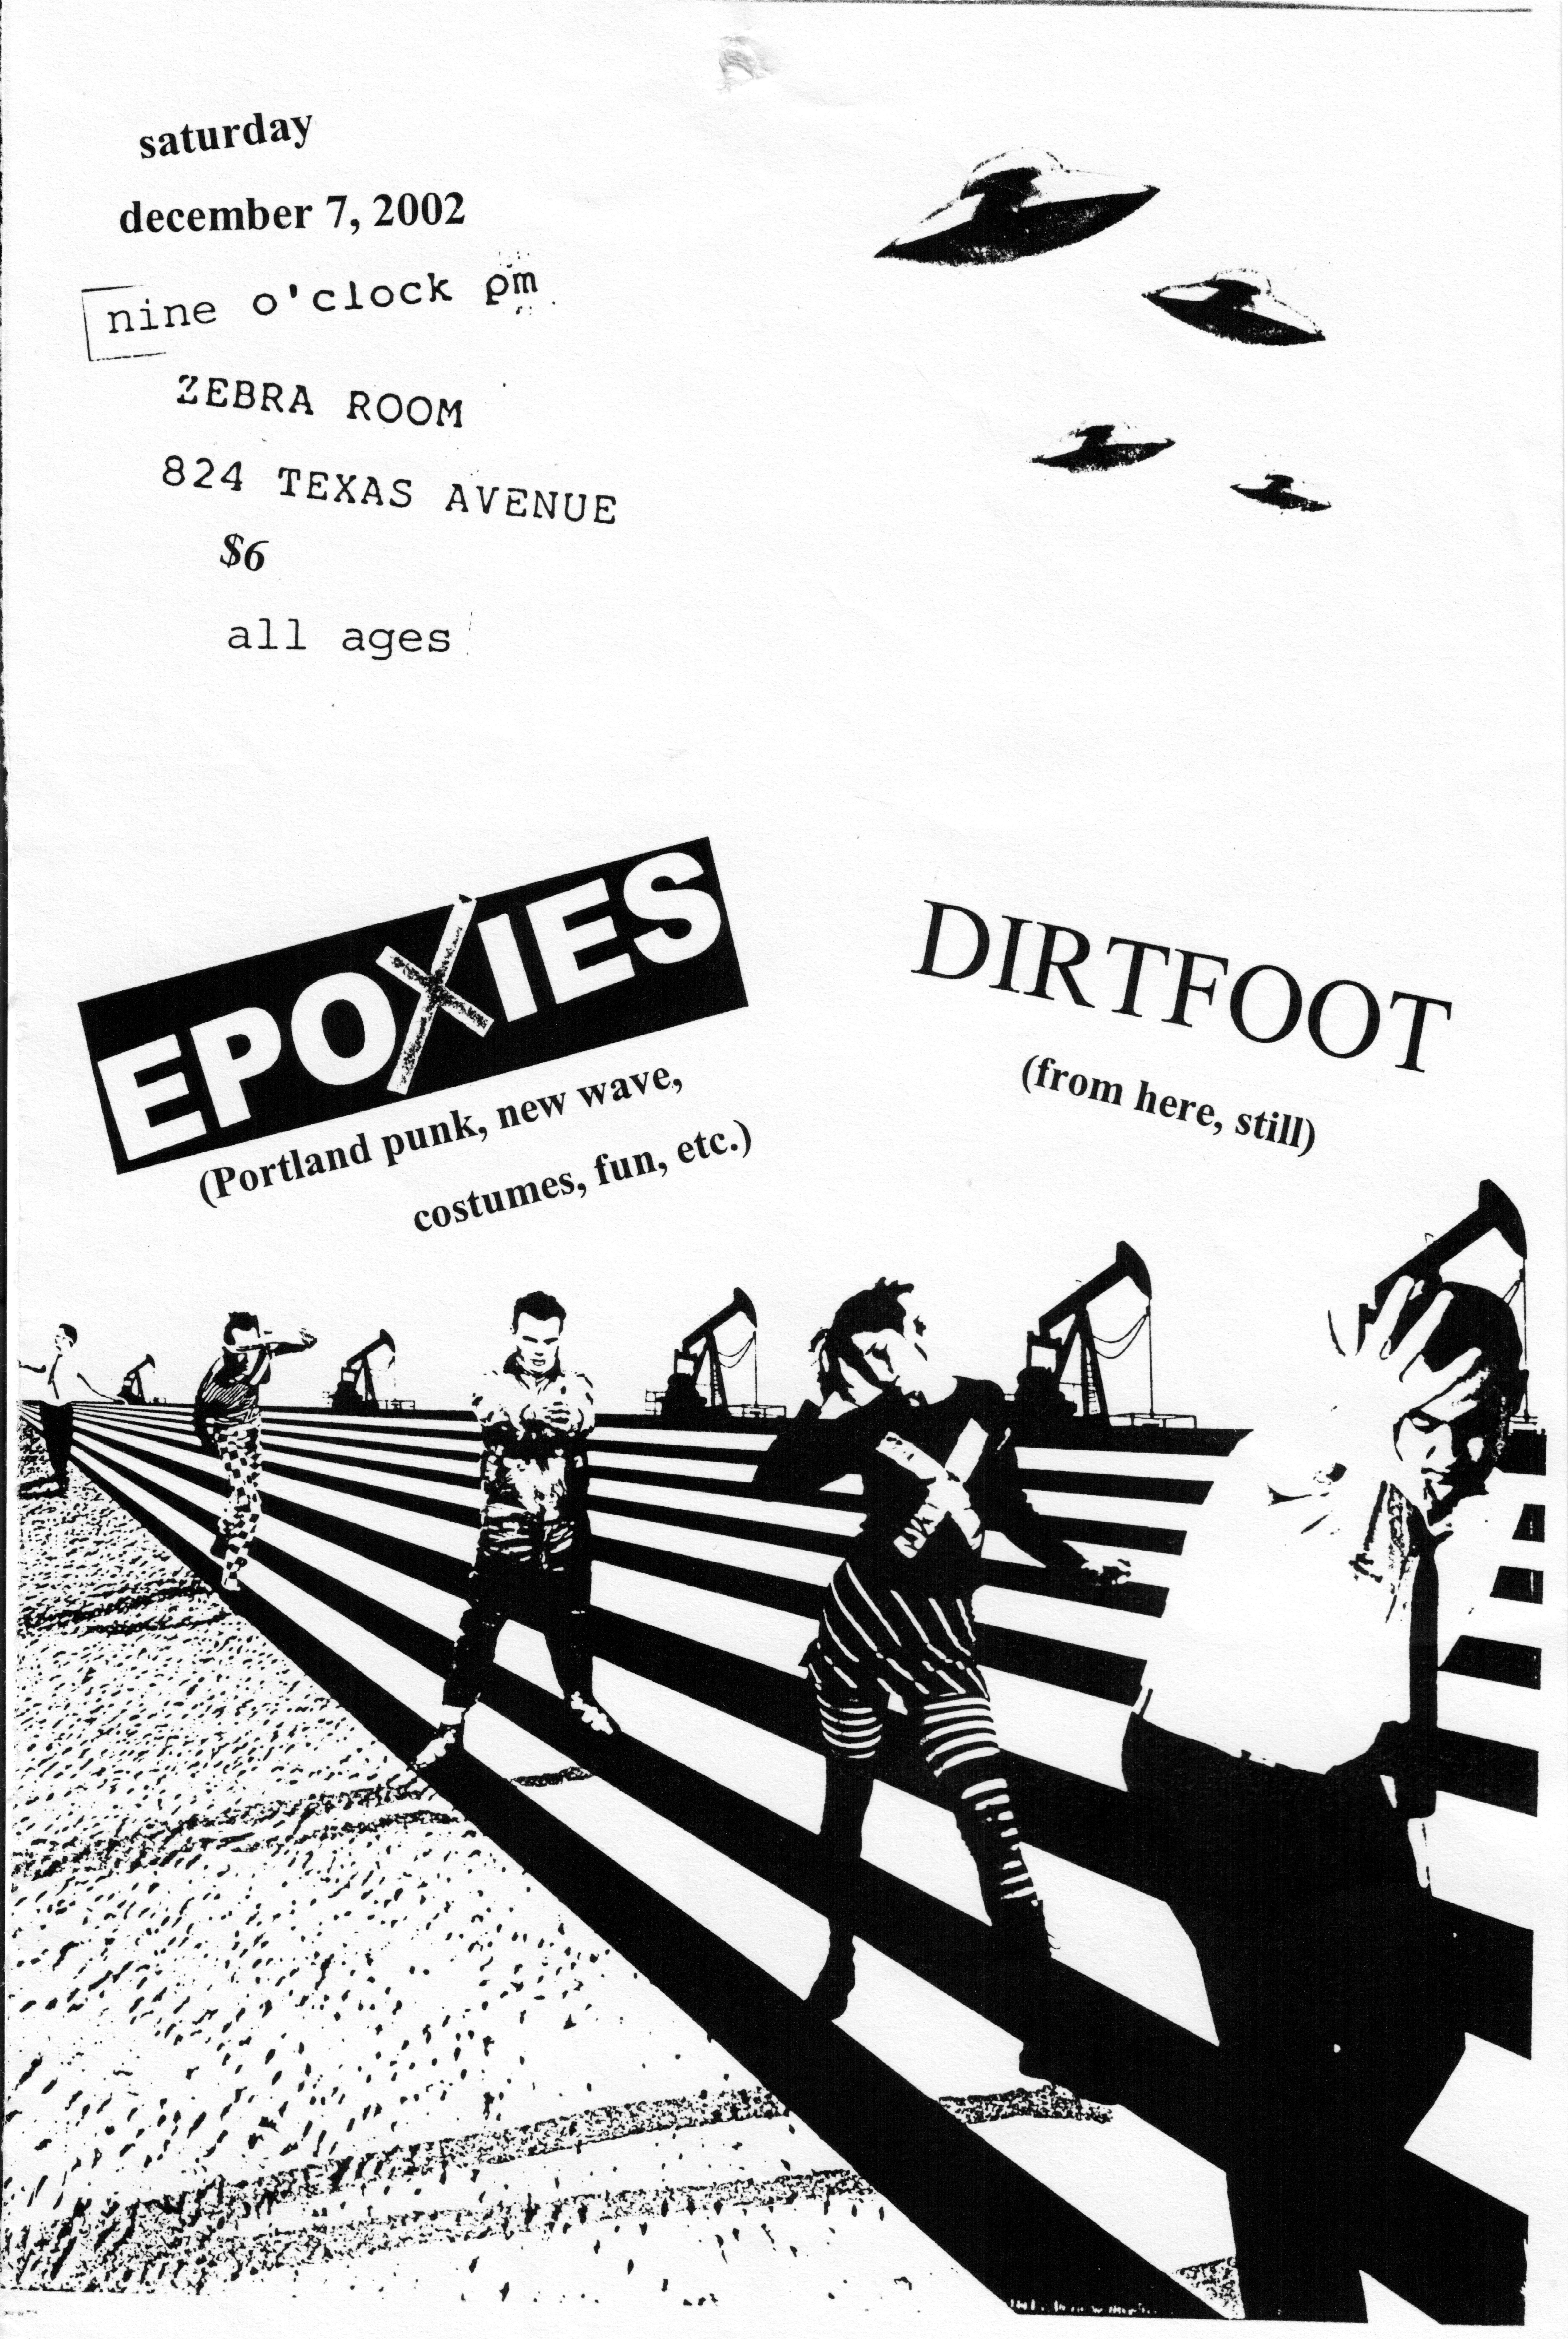 Epoxies and Dirtfoot